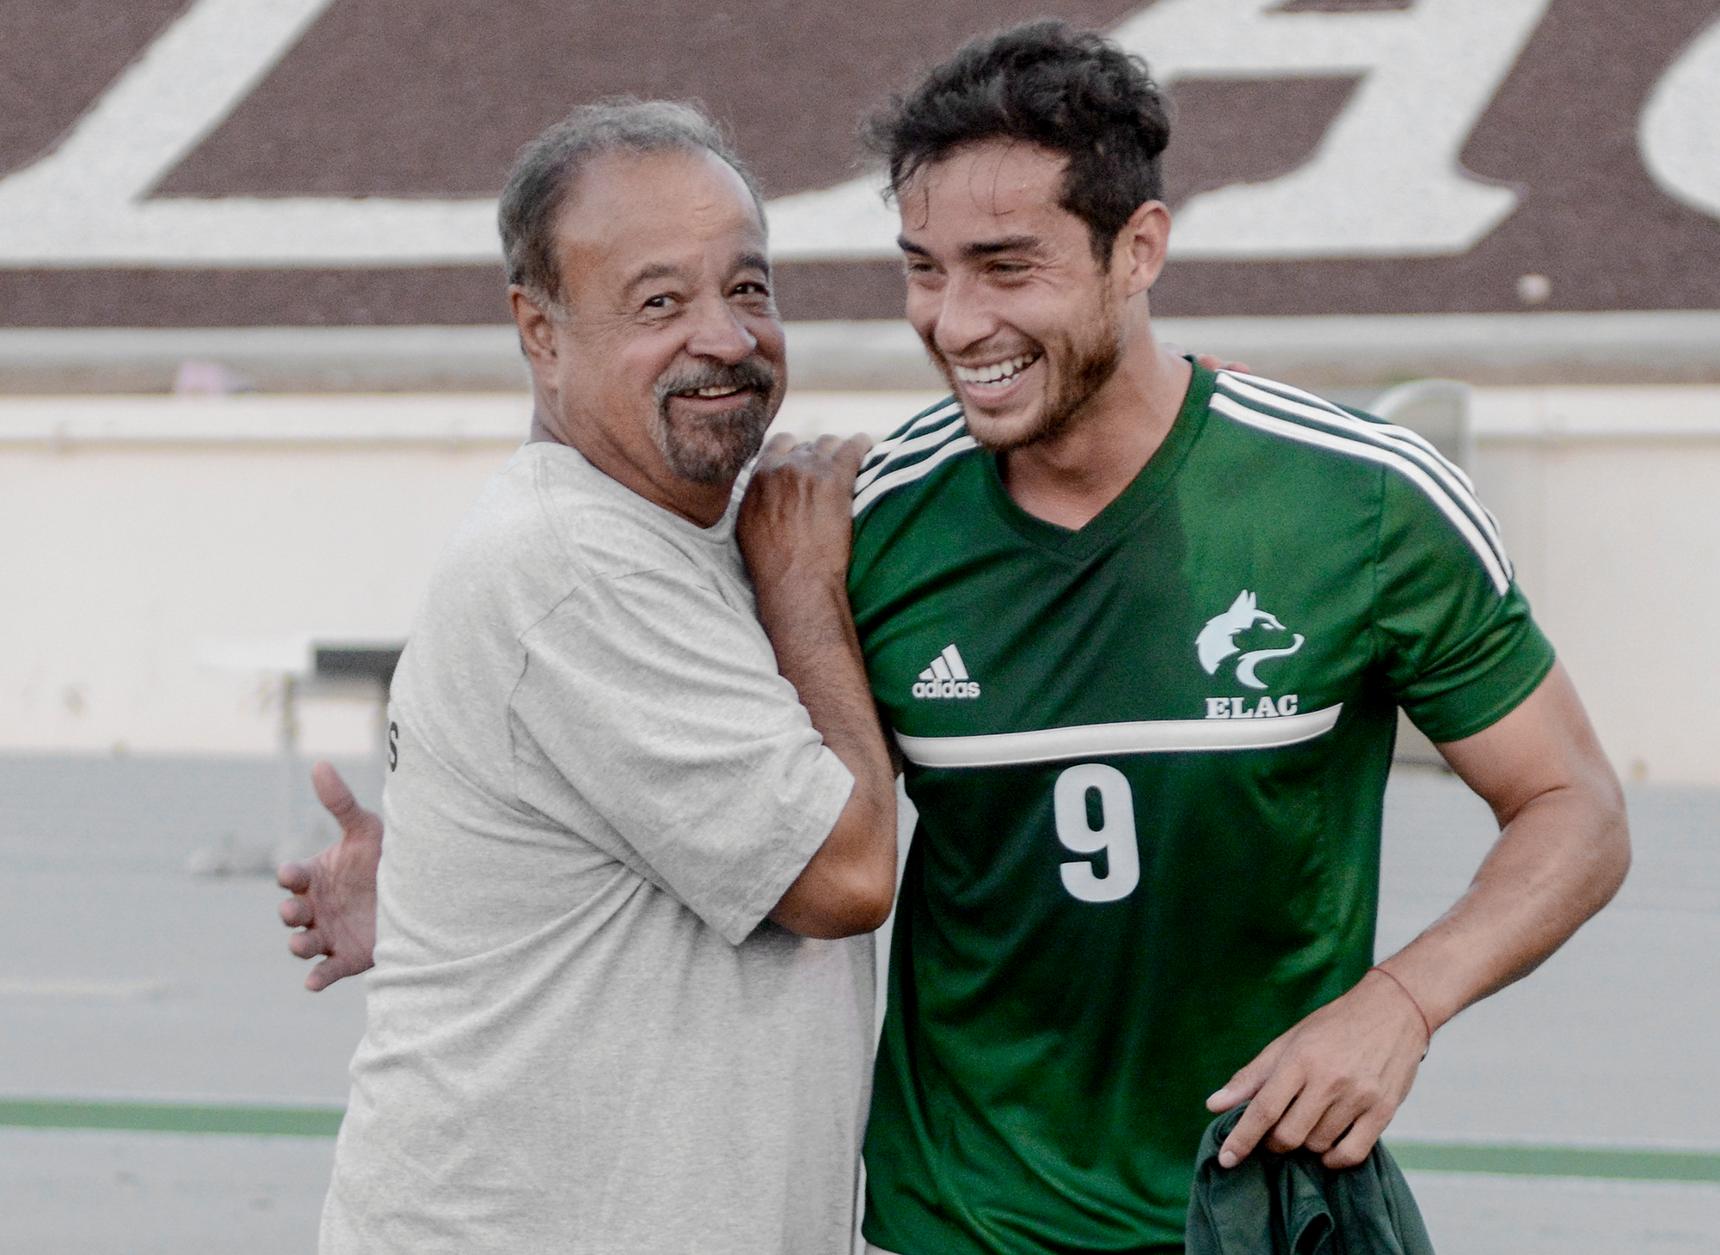 East Los Angeles College sophomore forward Cesar Alvarez is all smiles after a training on Sept. 9 with men's soccer coach Eddie Flores. Alvarez has scored three goals the Huskies this season, two in a recent 3-3 tie vs. LA Harbor College.